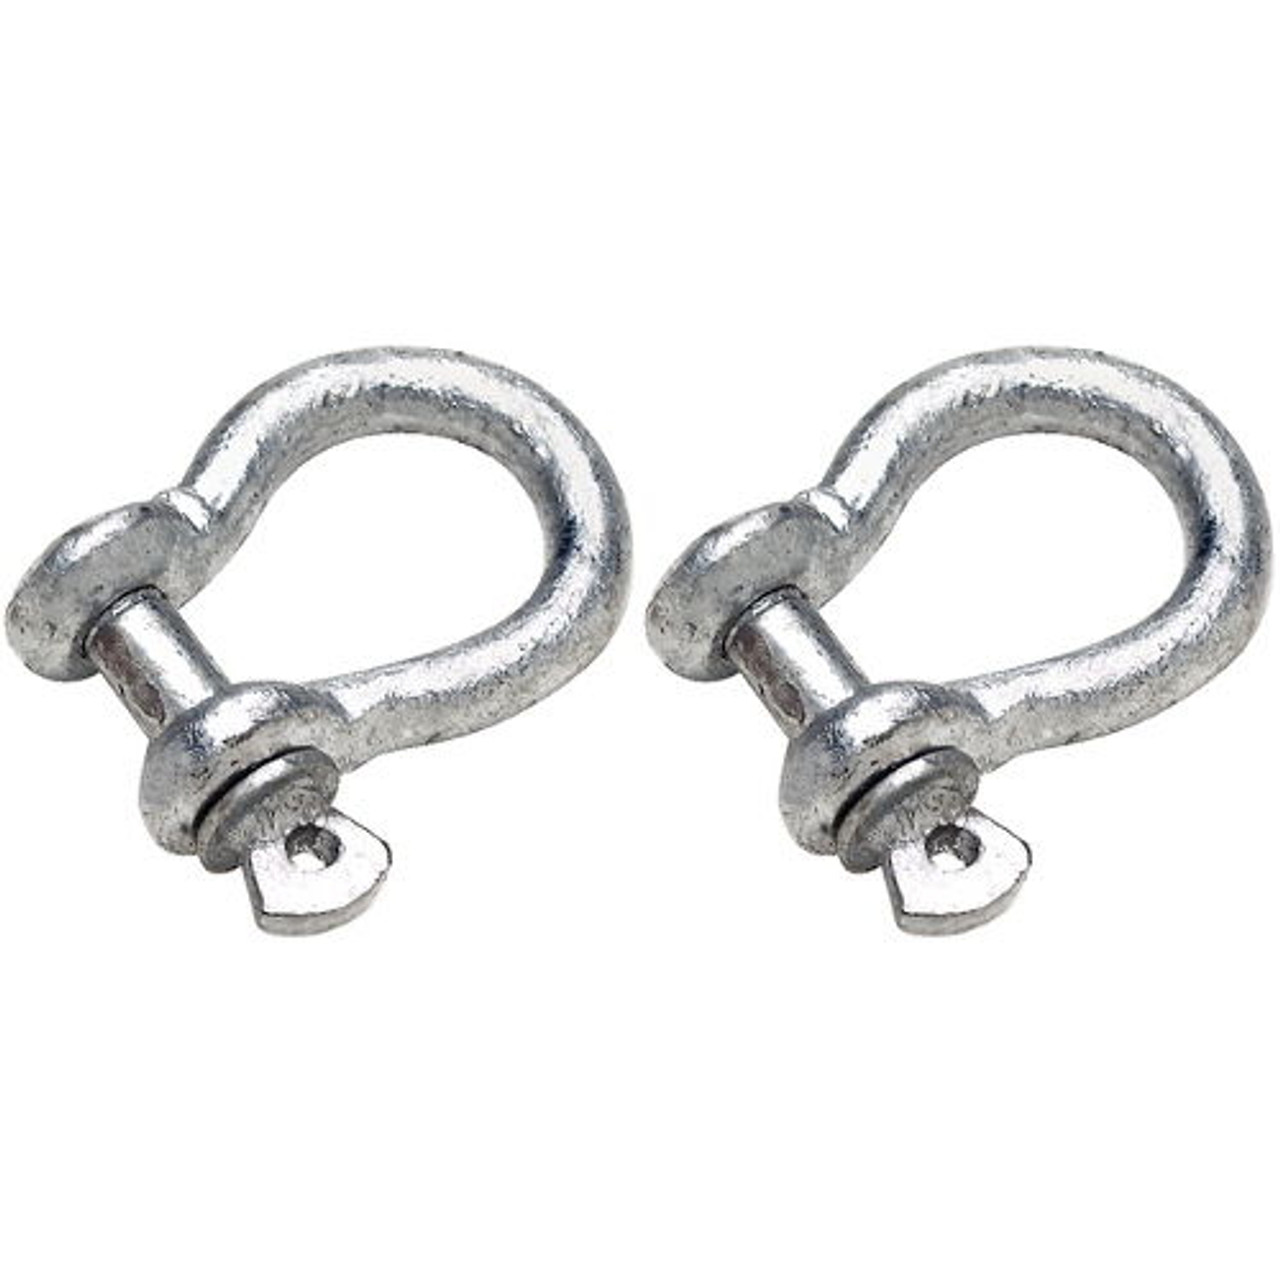 2 Pack 3/8 Inch Galvanized Anchor Shackles for Boats 8,800 lbs Breaking Strength